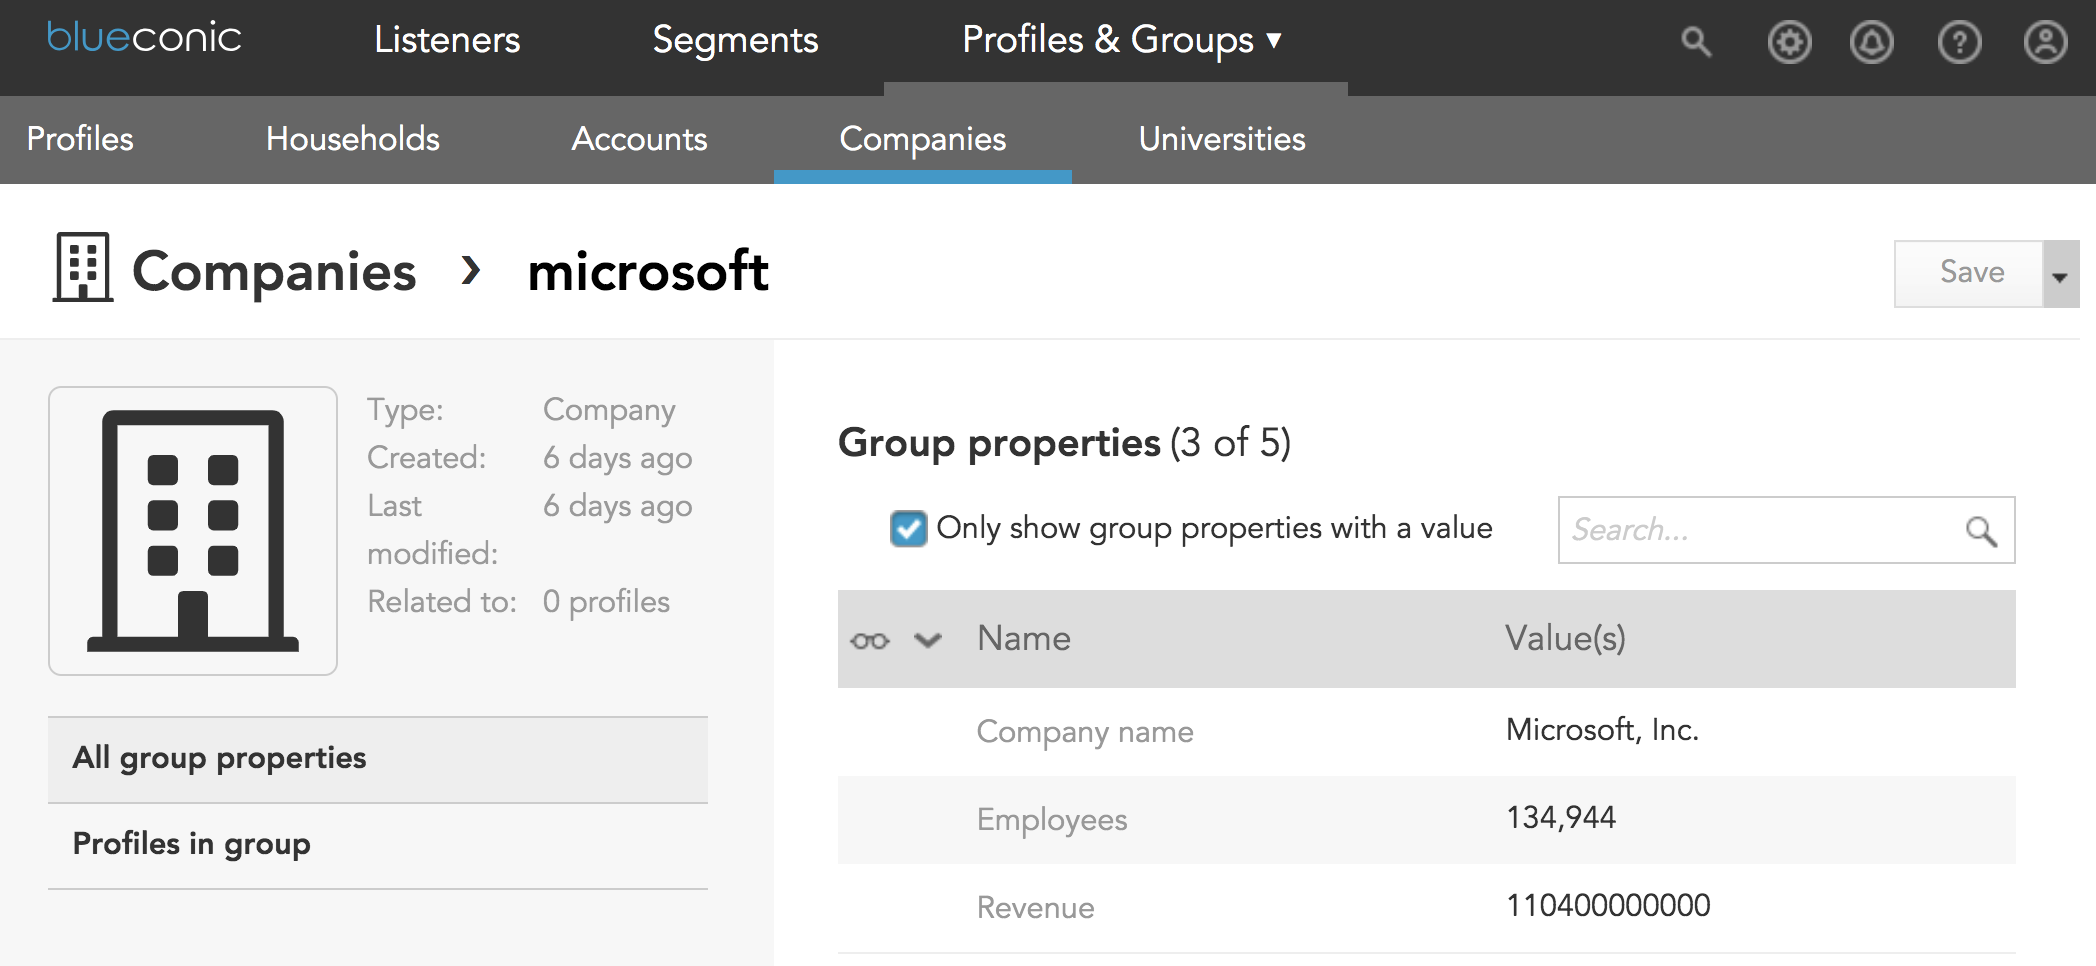 How do I find out which profiles are in a group, household, or account in BlueConic?